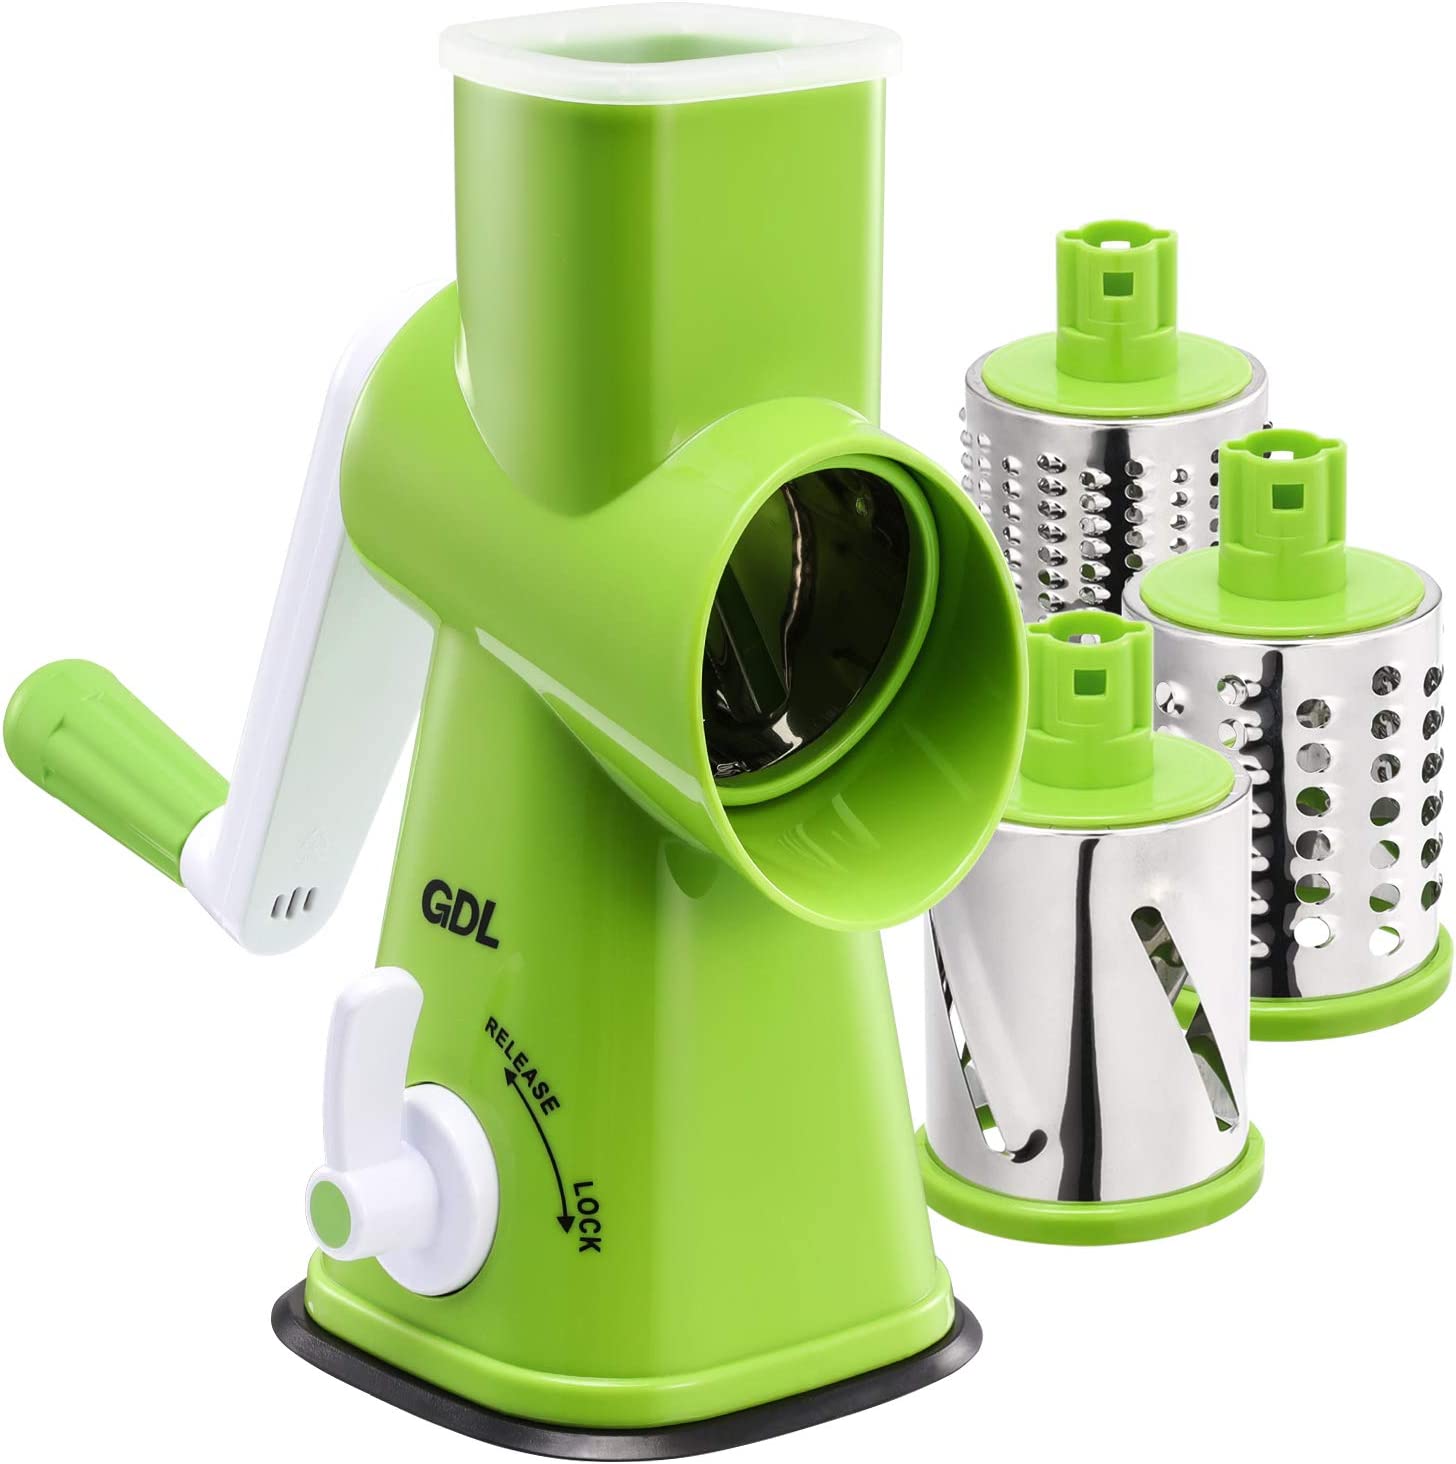 Rotary Cheese Grater, Kitchen Vegetable Slicer,rotary Grater Slicer For  Fruit, Vegetables, Nuts